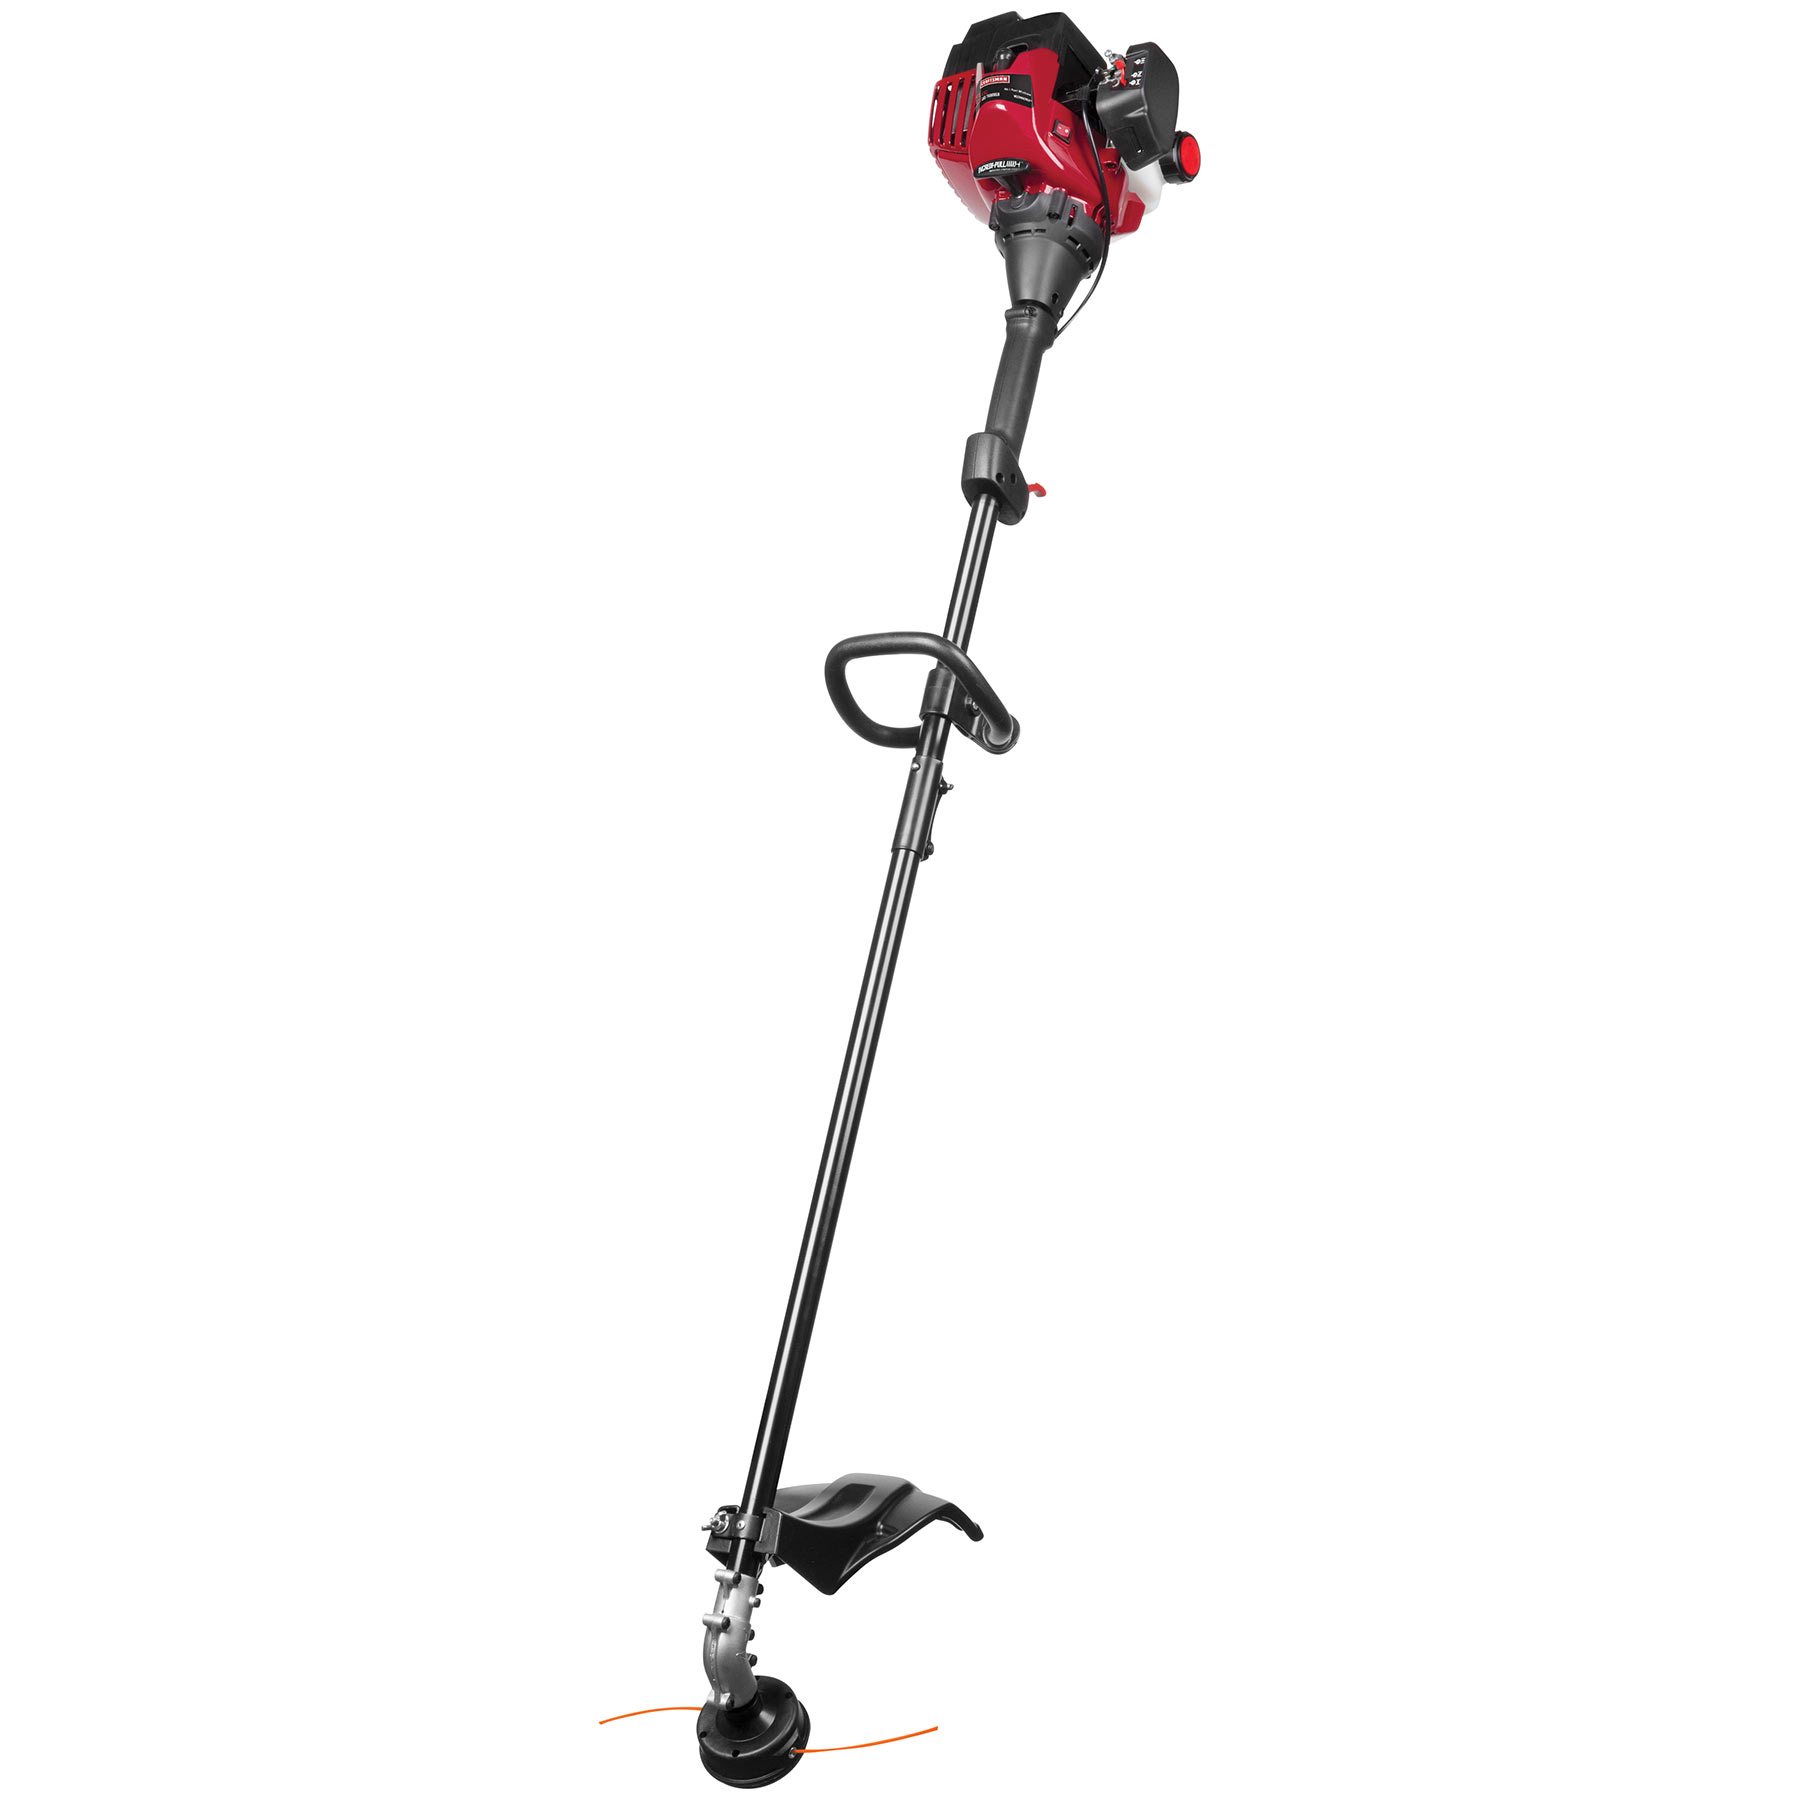 Craftsman 79447 2-Cycle 25cc Gas Weedwacker with Straight